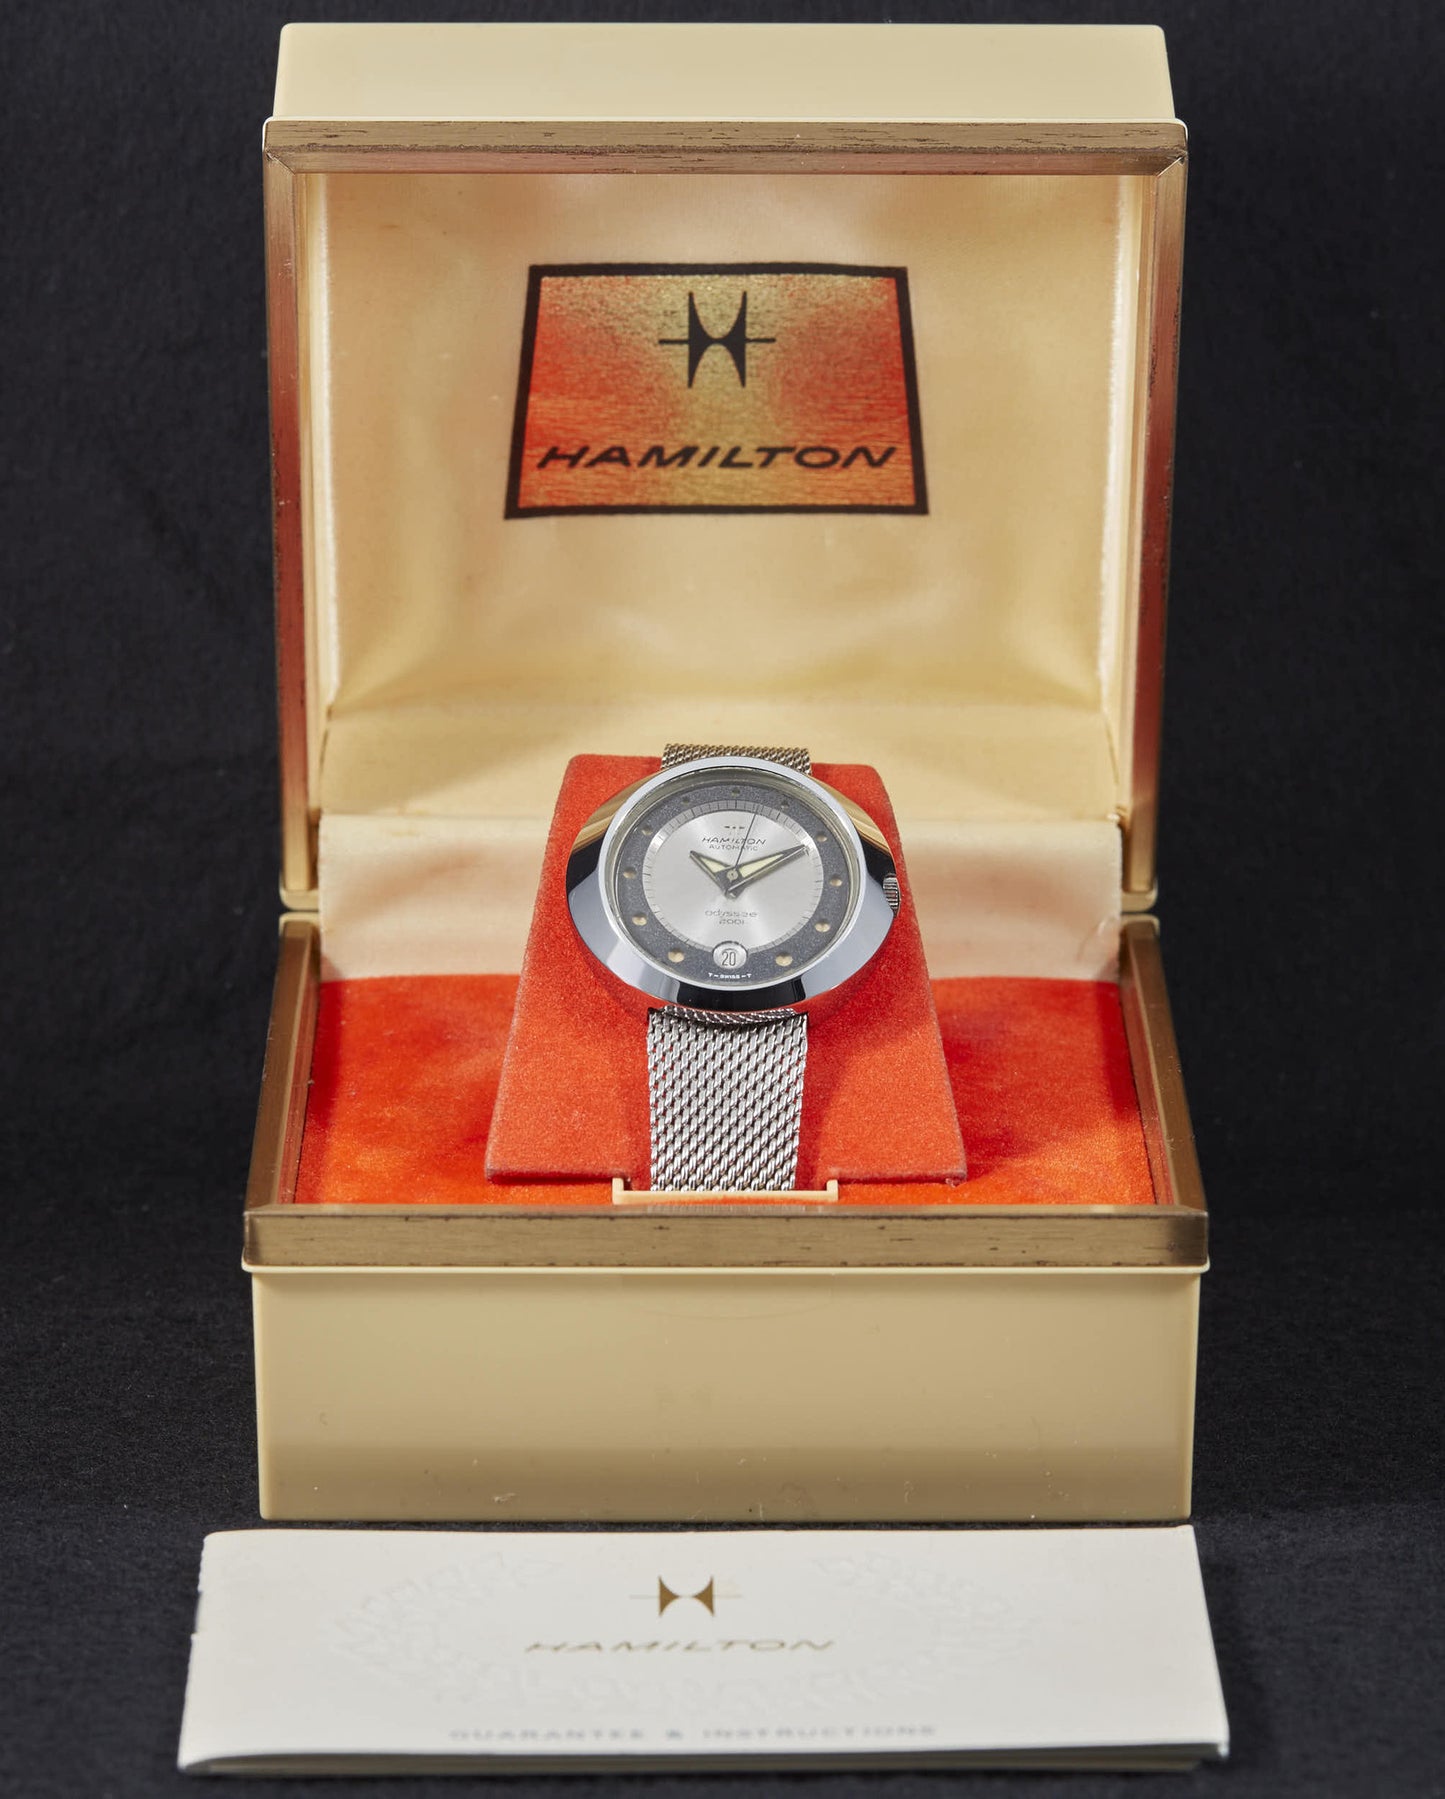 Hamilton Odyssee 2001 Box and Papers